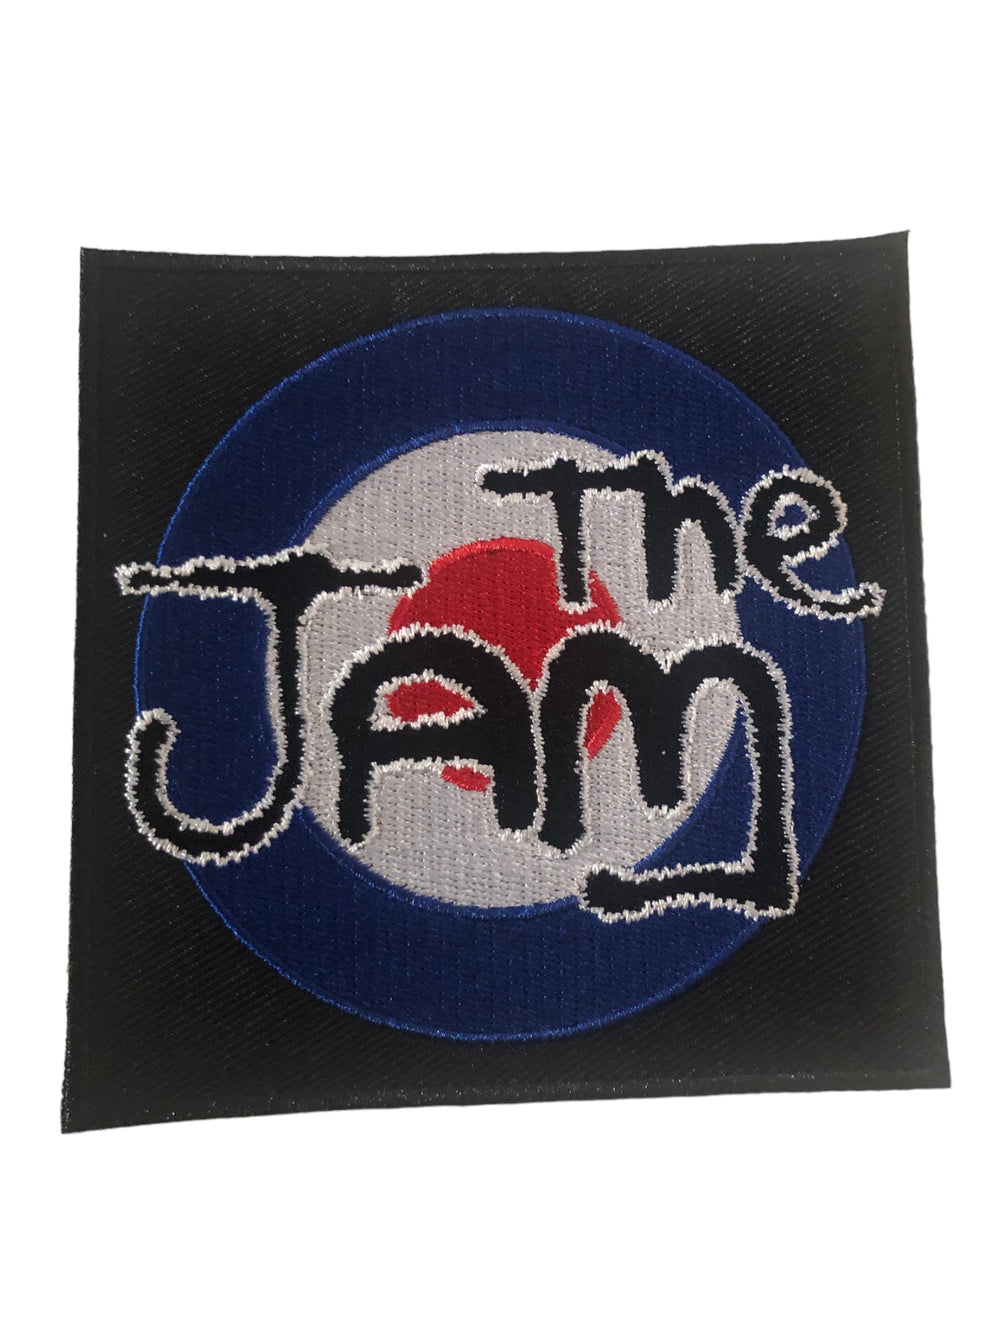 Jam Spray Target Logo Official Woven Patch Brand New